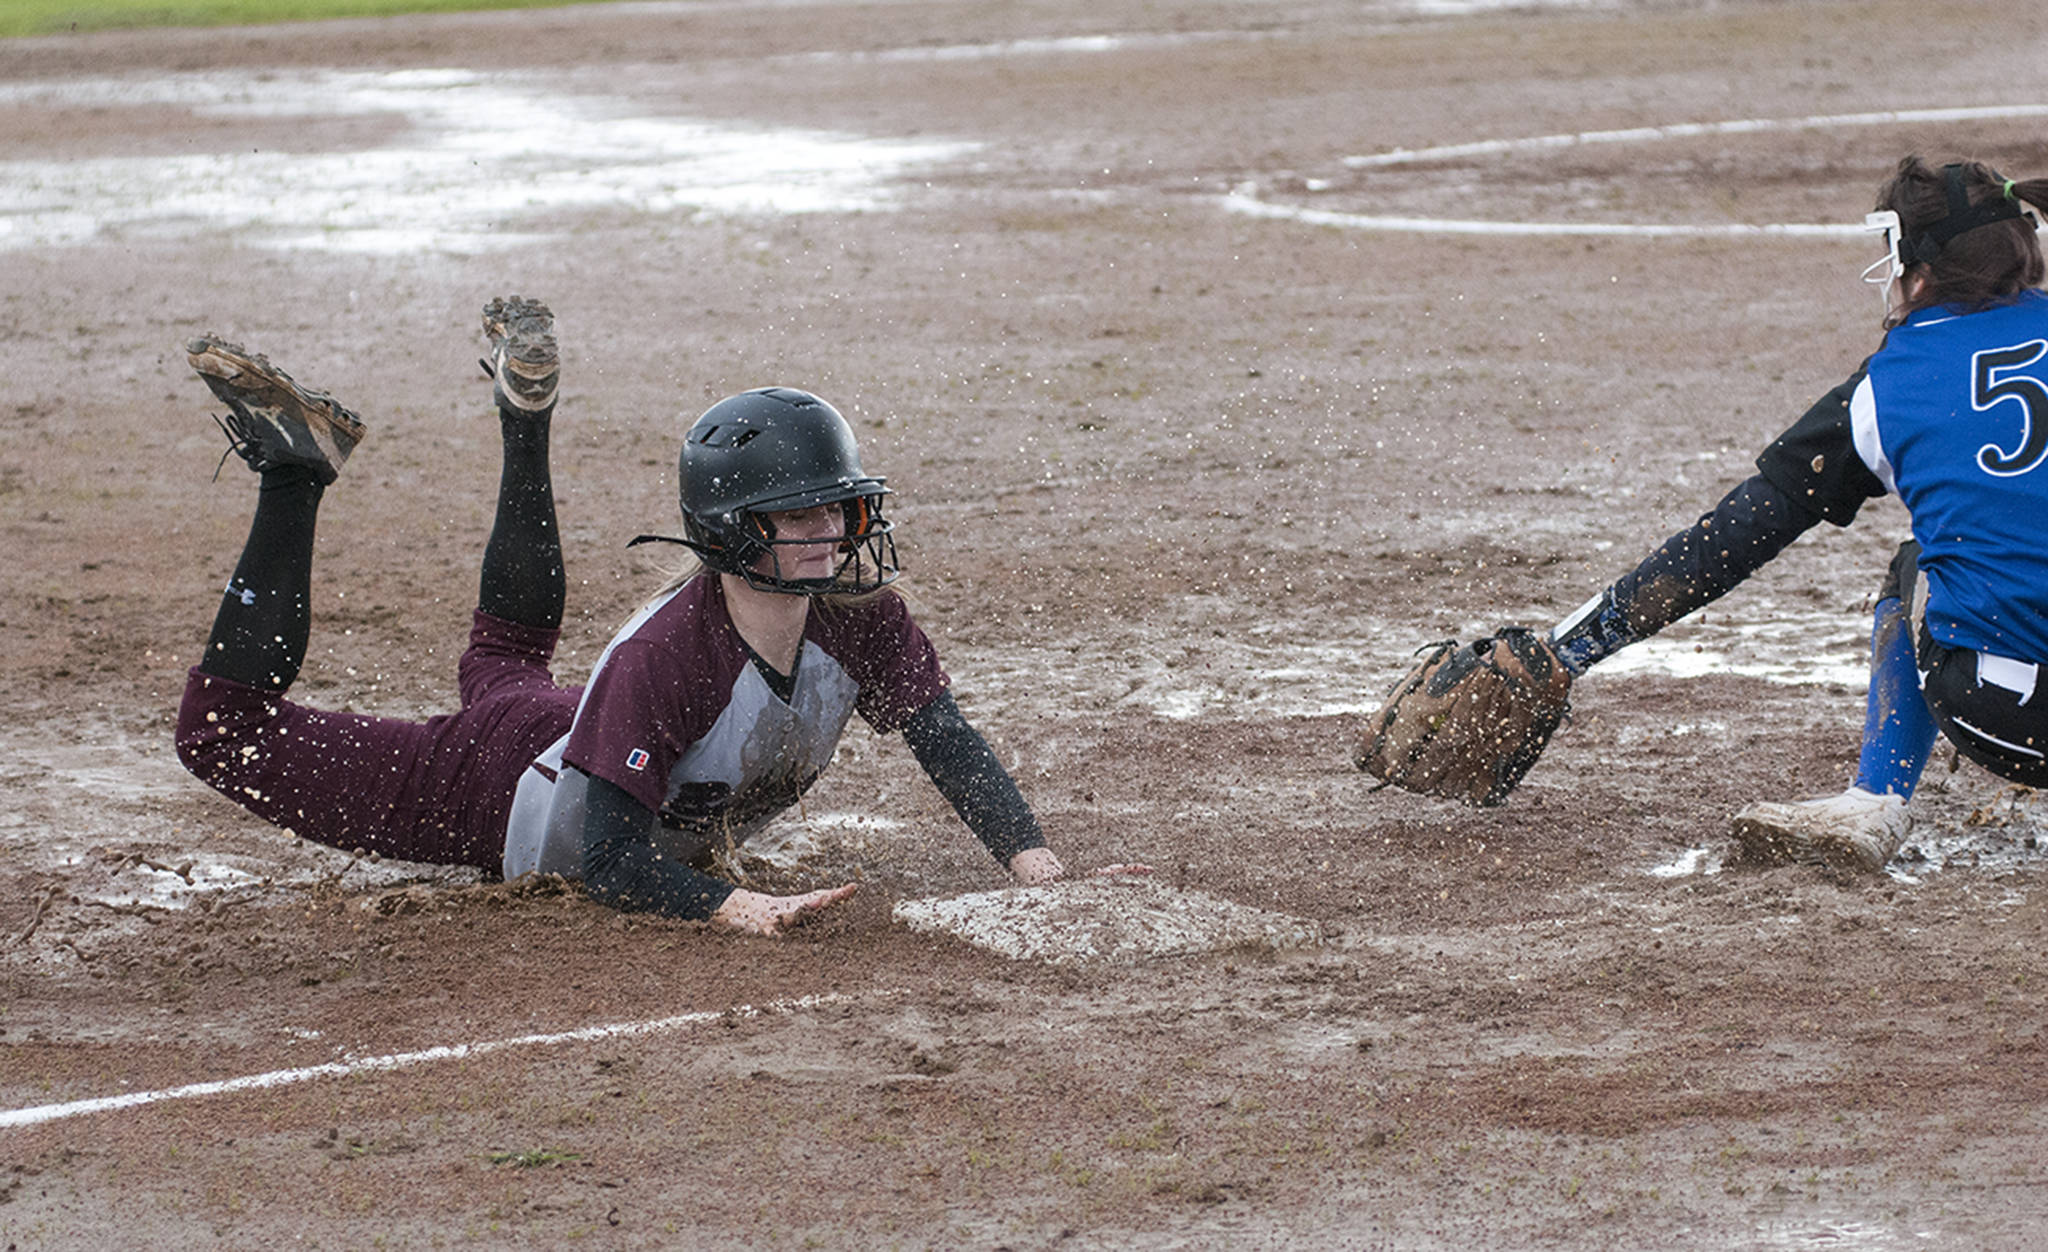 (Brendan Carl | The Daily World) Montesano’s Cheyann Bartlett slides into third base ahead of the tag from Elma’s Kali Rambo during an Evergreen 1A League game on Friday.